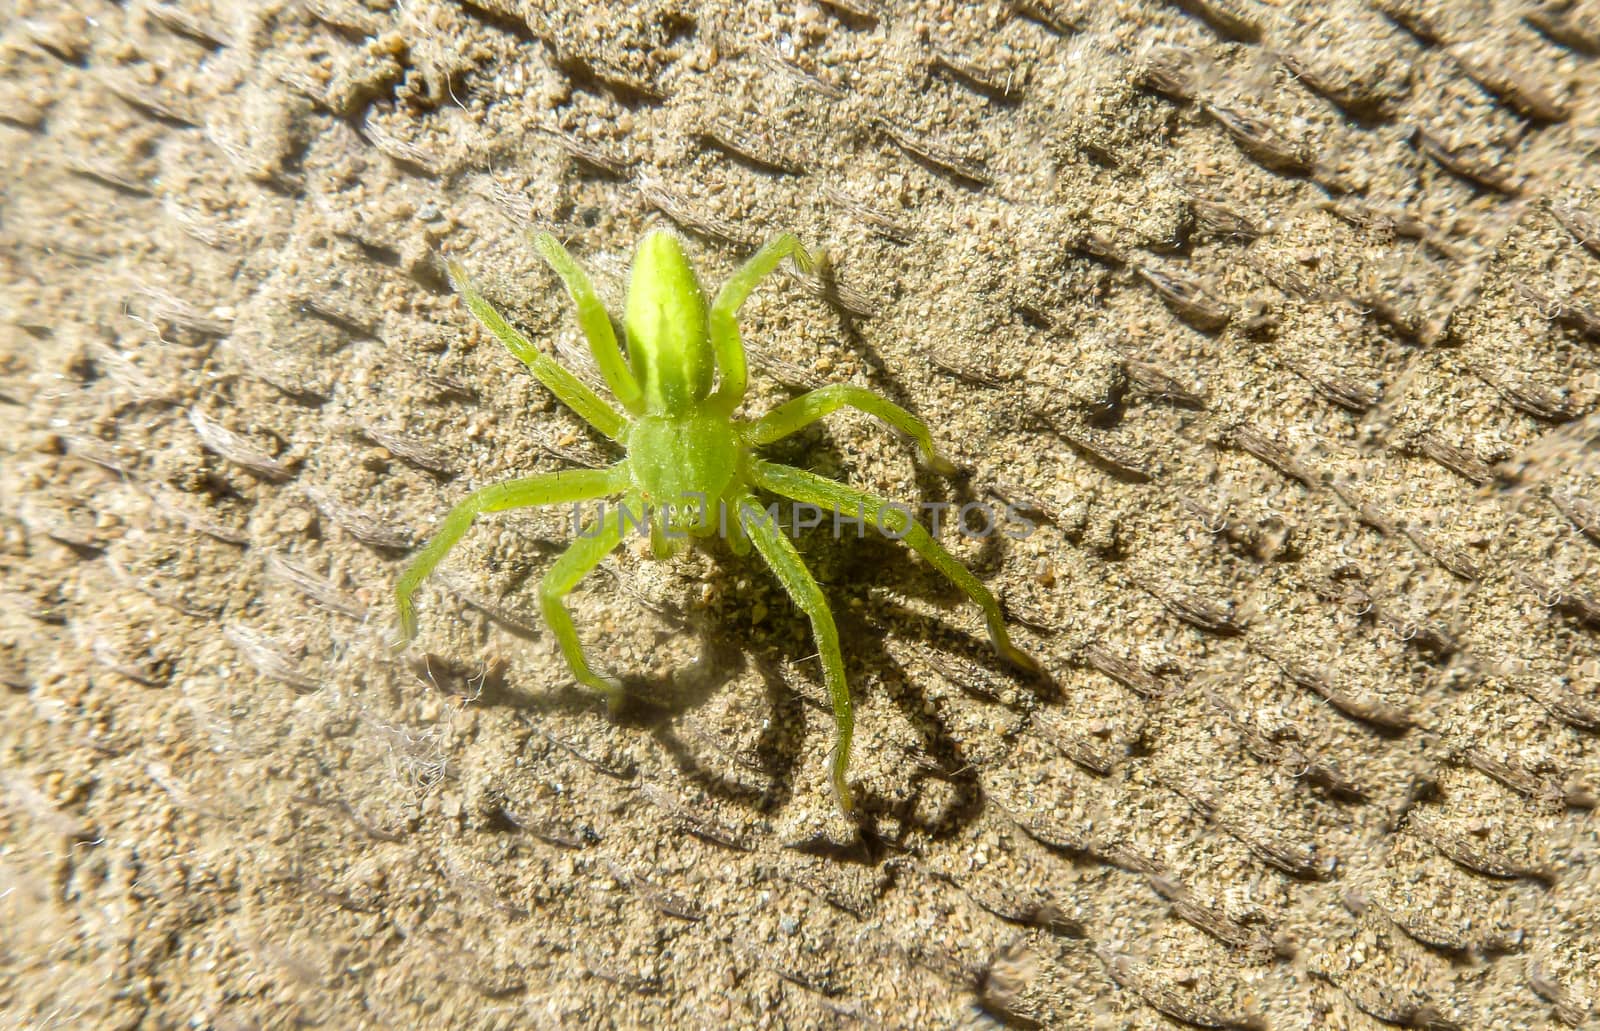 Little green spider sits on sandy surface